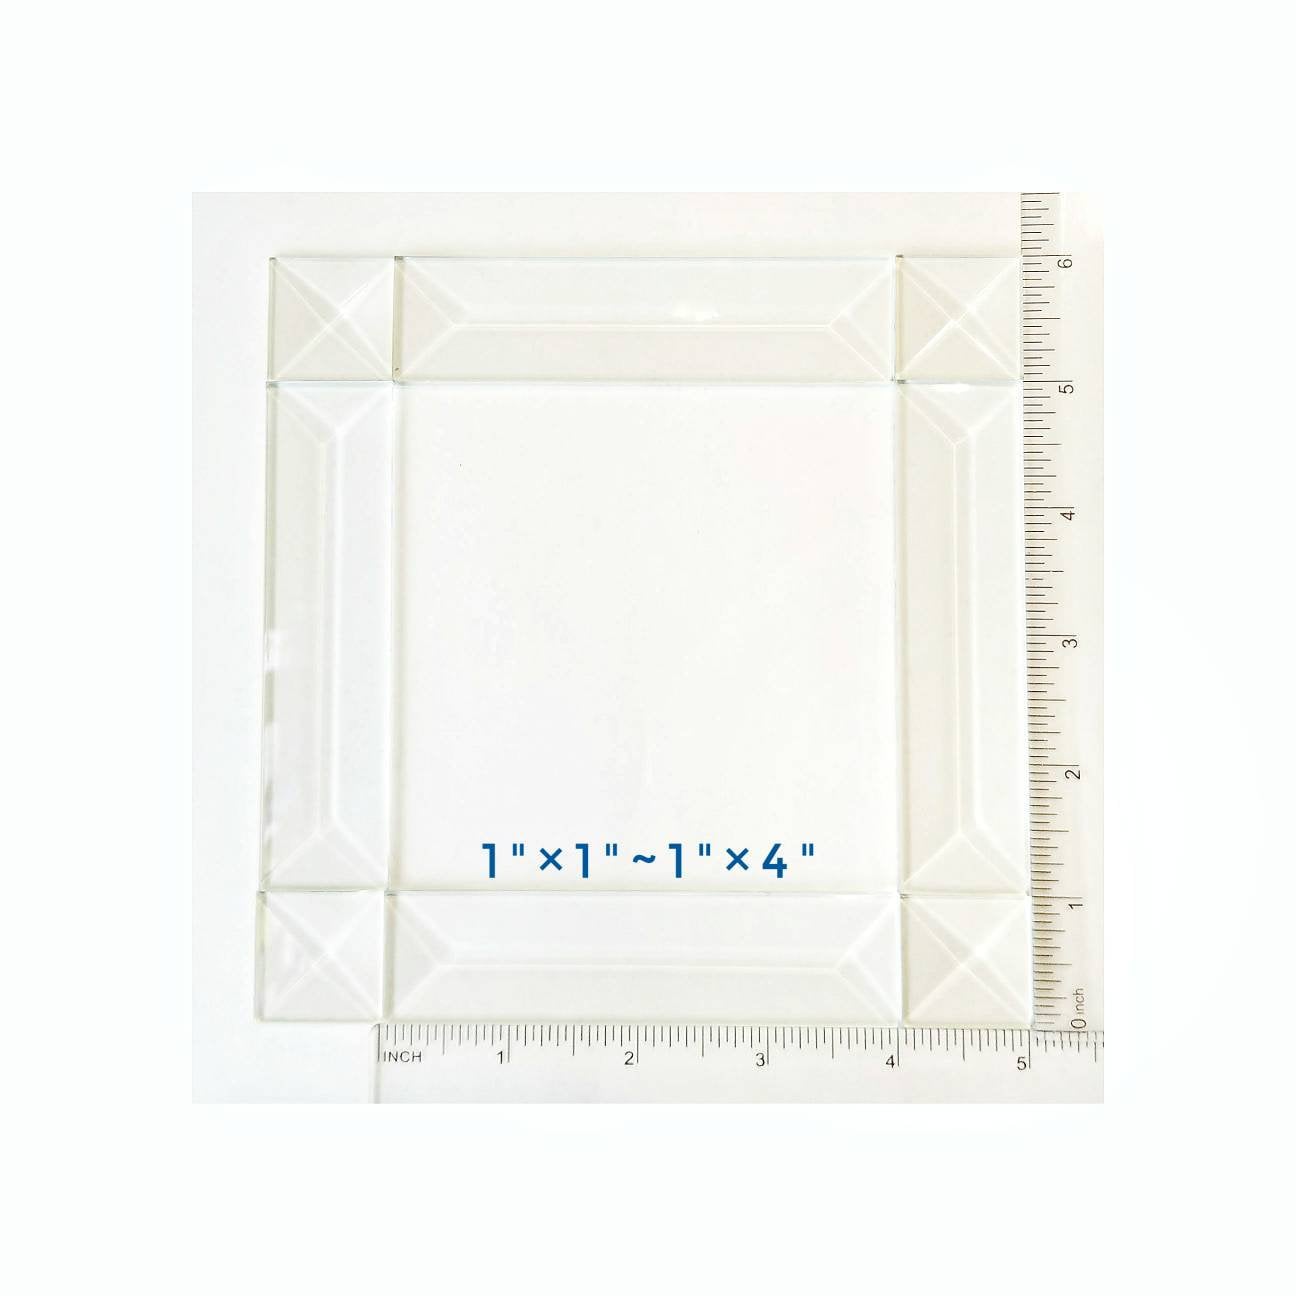 Bevels for stained glass, diy craft projects, beveled suncatchers. SET of 8 clear prisms. 4 each, 1"× 1" squares & 1"× 4" rectangles.